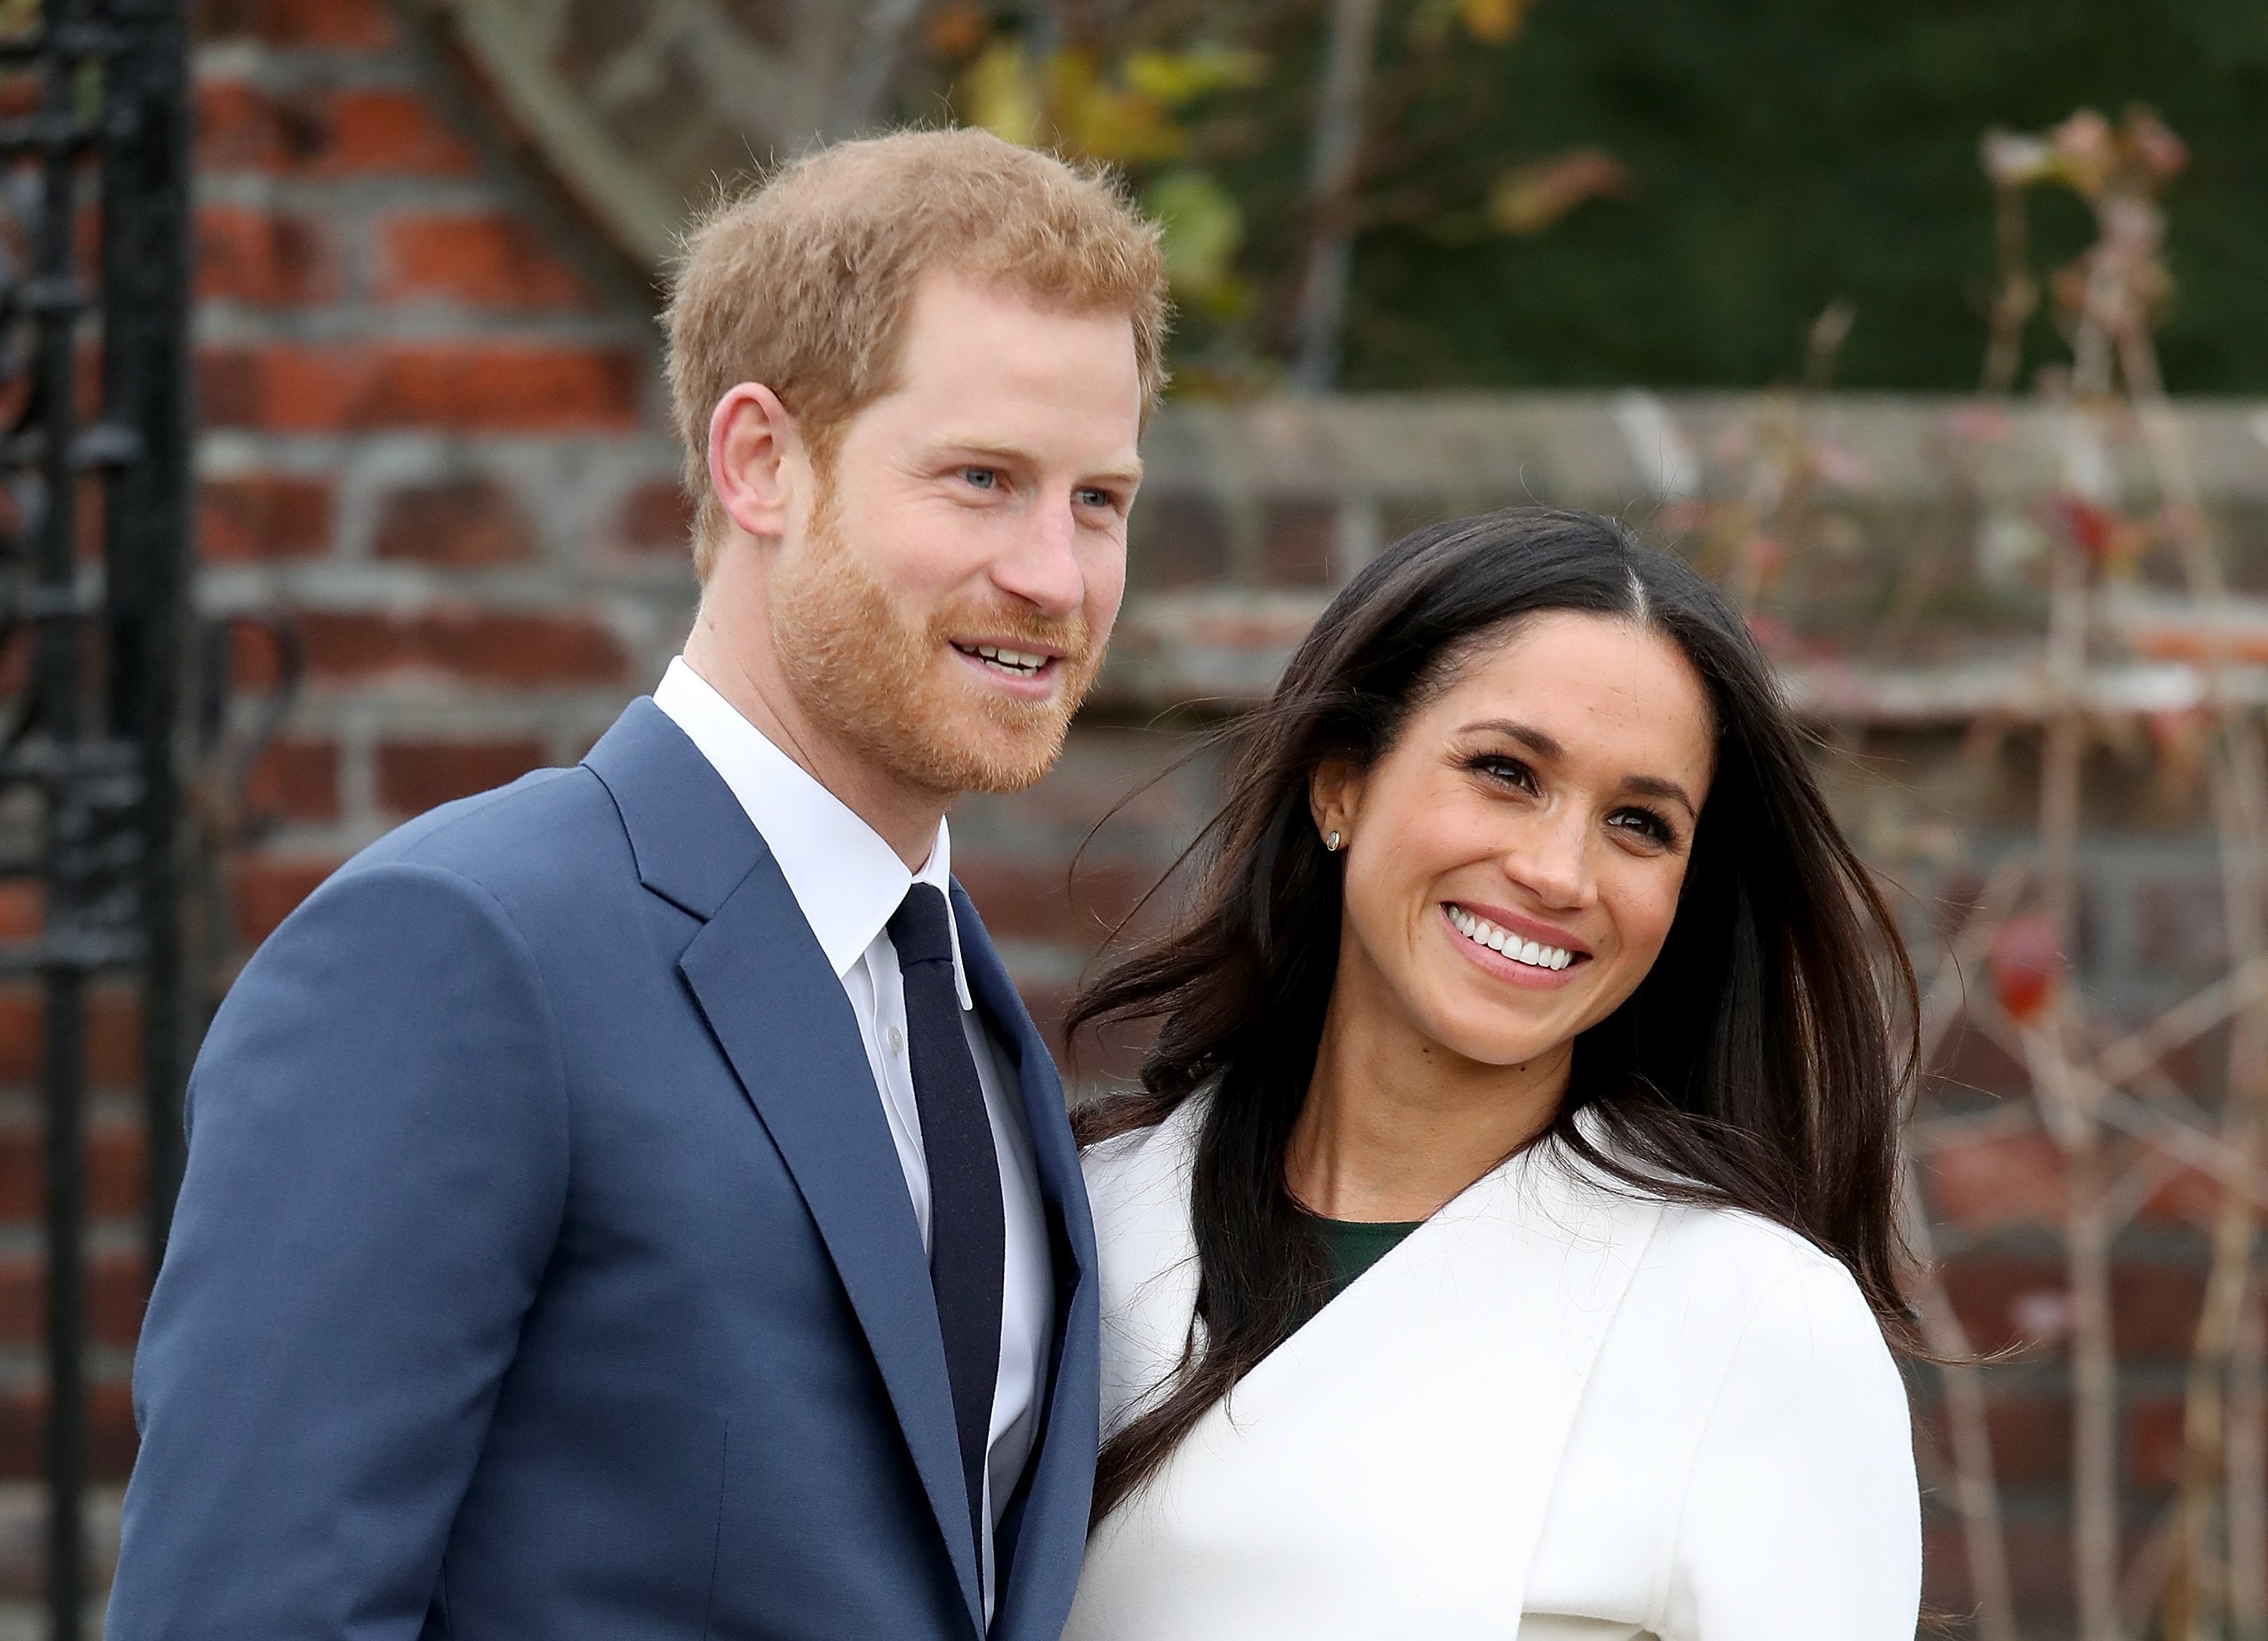 Prince Harry and actress Meghan Markle during an official photocall to announce their engagement at The Sunken Gardens at Kensington Palace on November 27, 2017, in London, England. | Source: Getty Images.